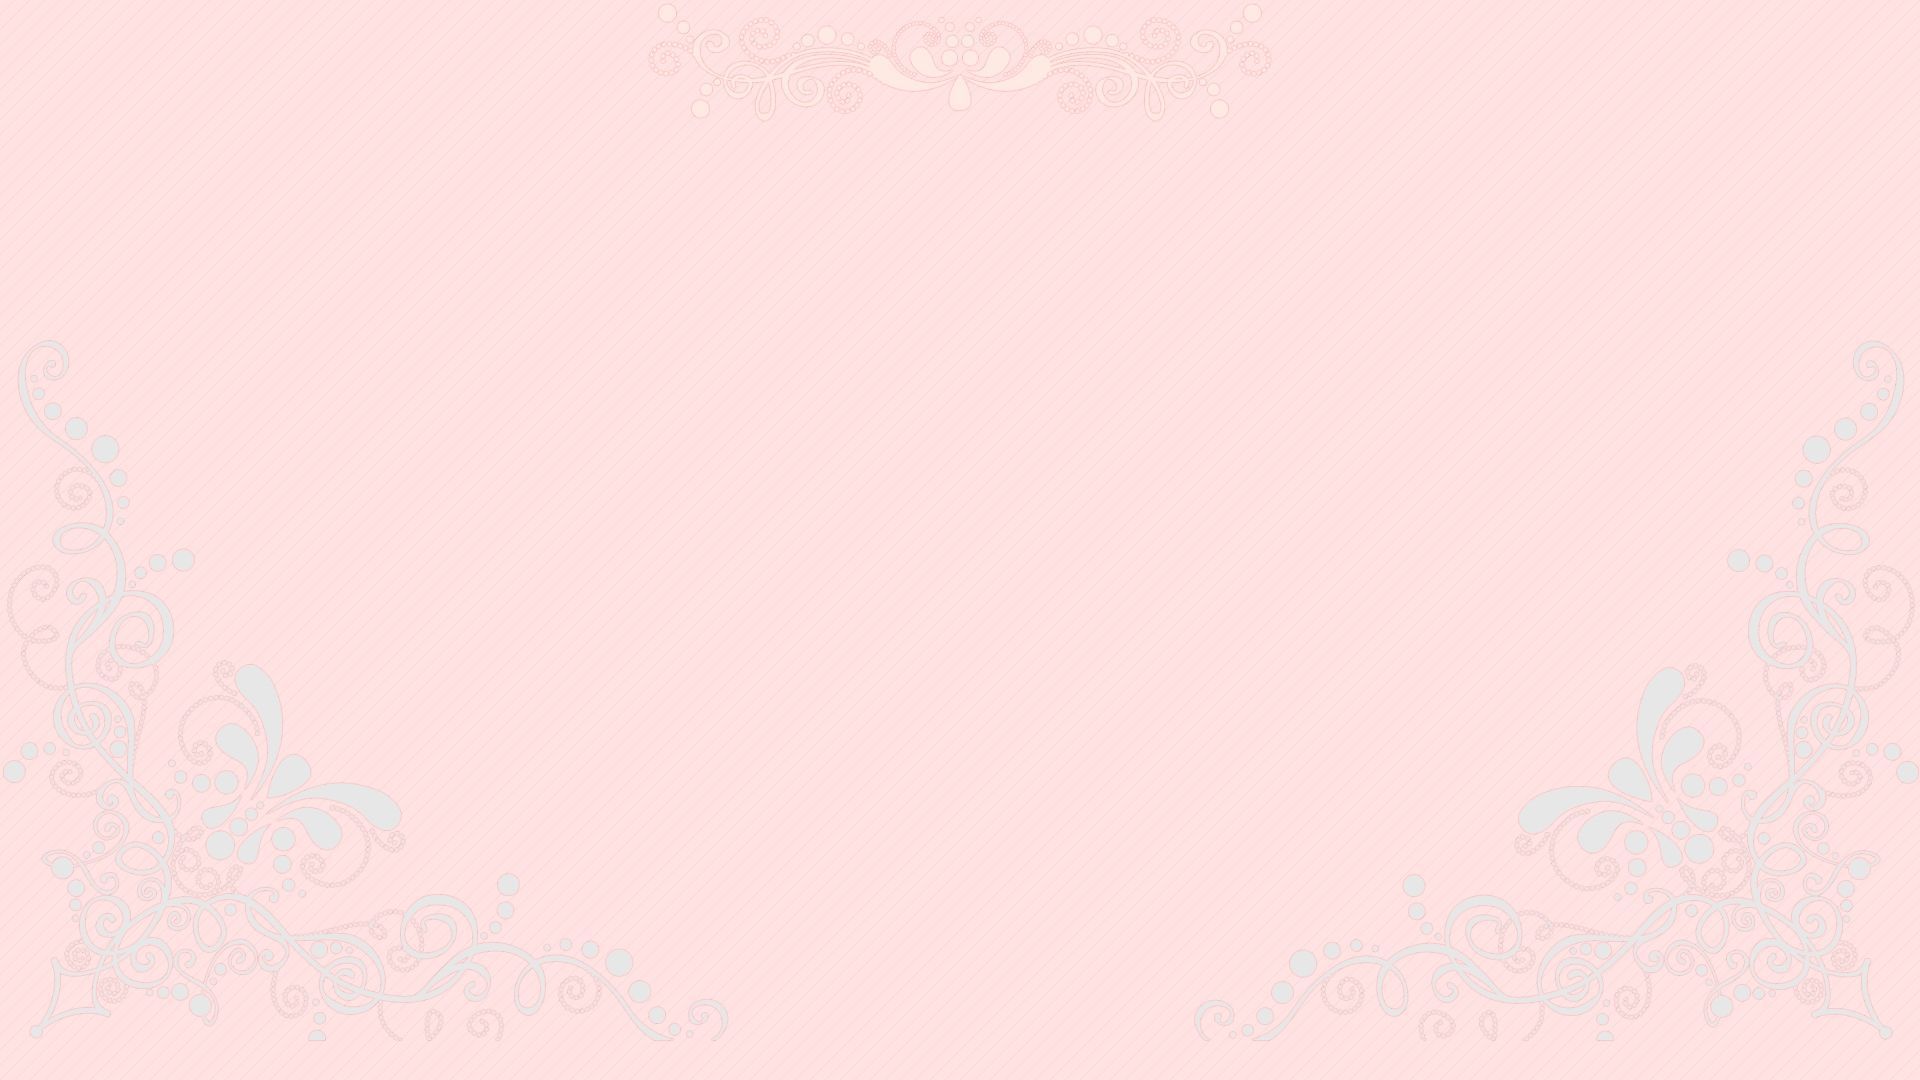 A pink frame with swirls and flowers - Pink, pastel pink